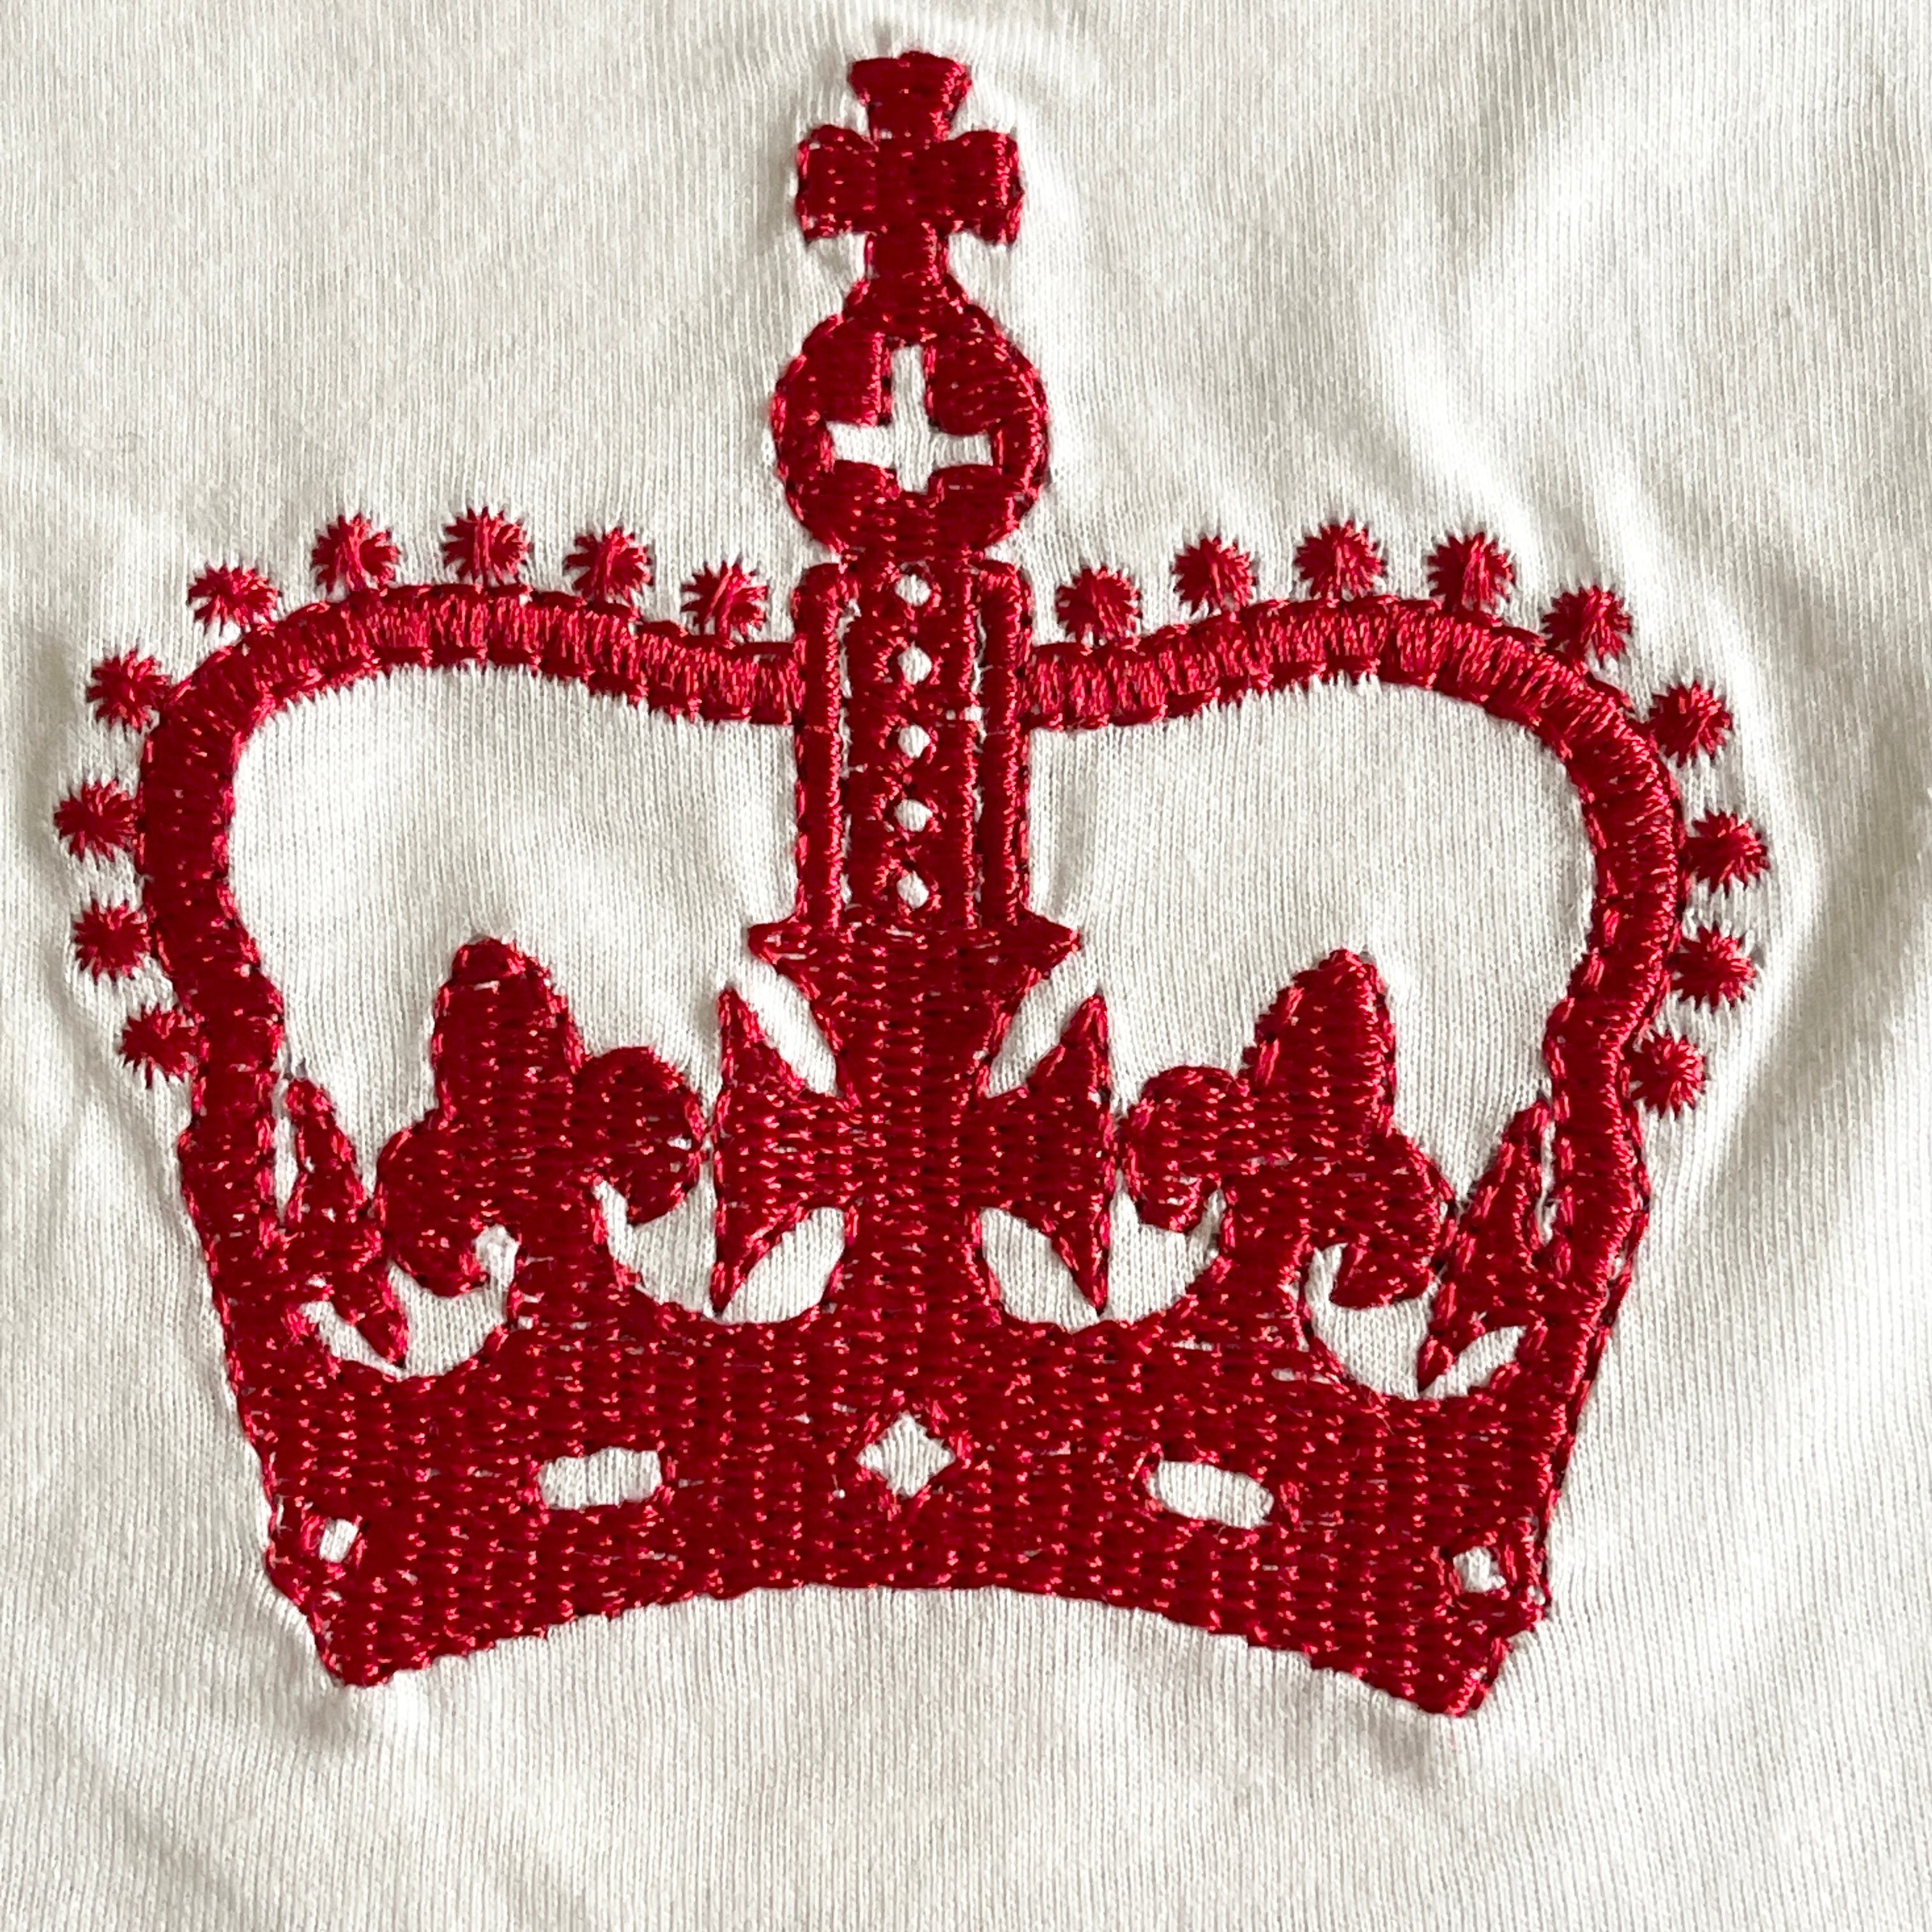 20%OFF! 『Westminster Abbey』Embroidered Crown Bib クラウン絵柄　スタイ